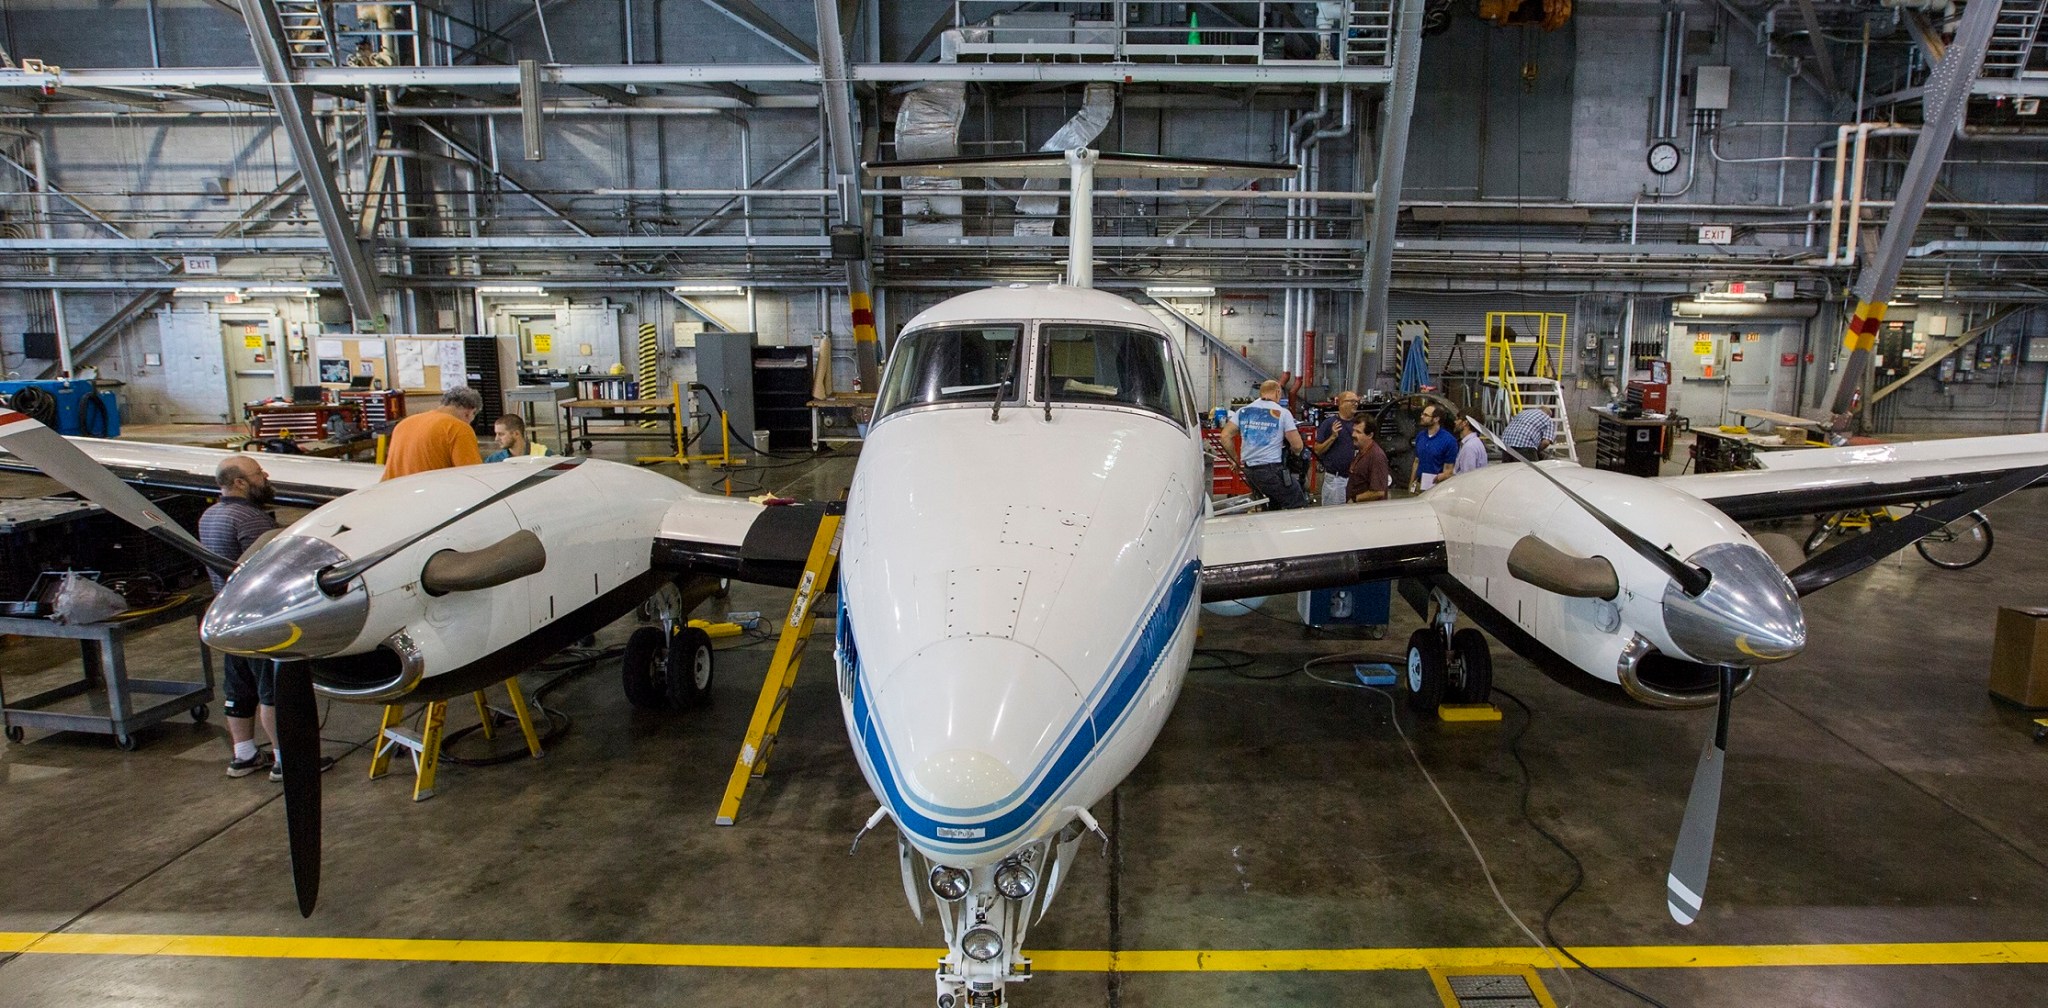 Scientists will fill NASA research aircraft, such as the B-200 King Air shown here, with advanced instruments